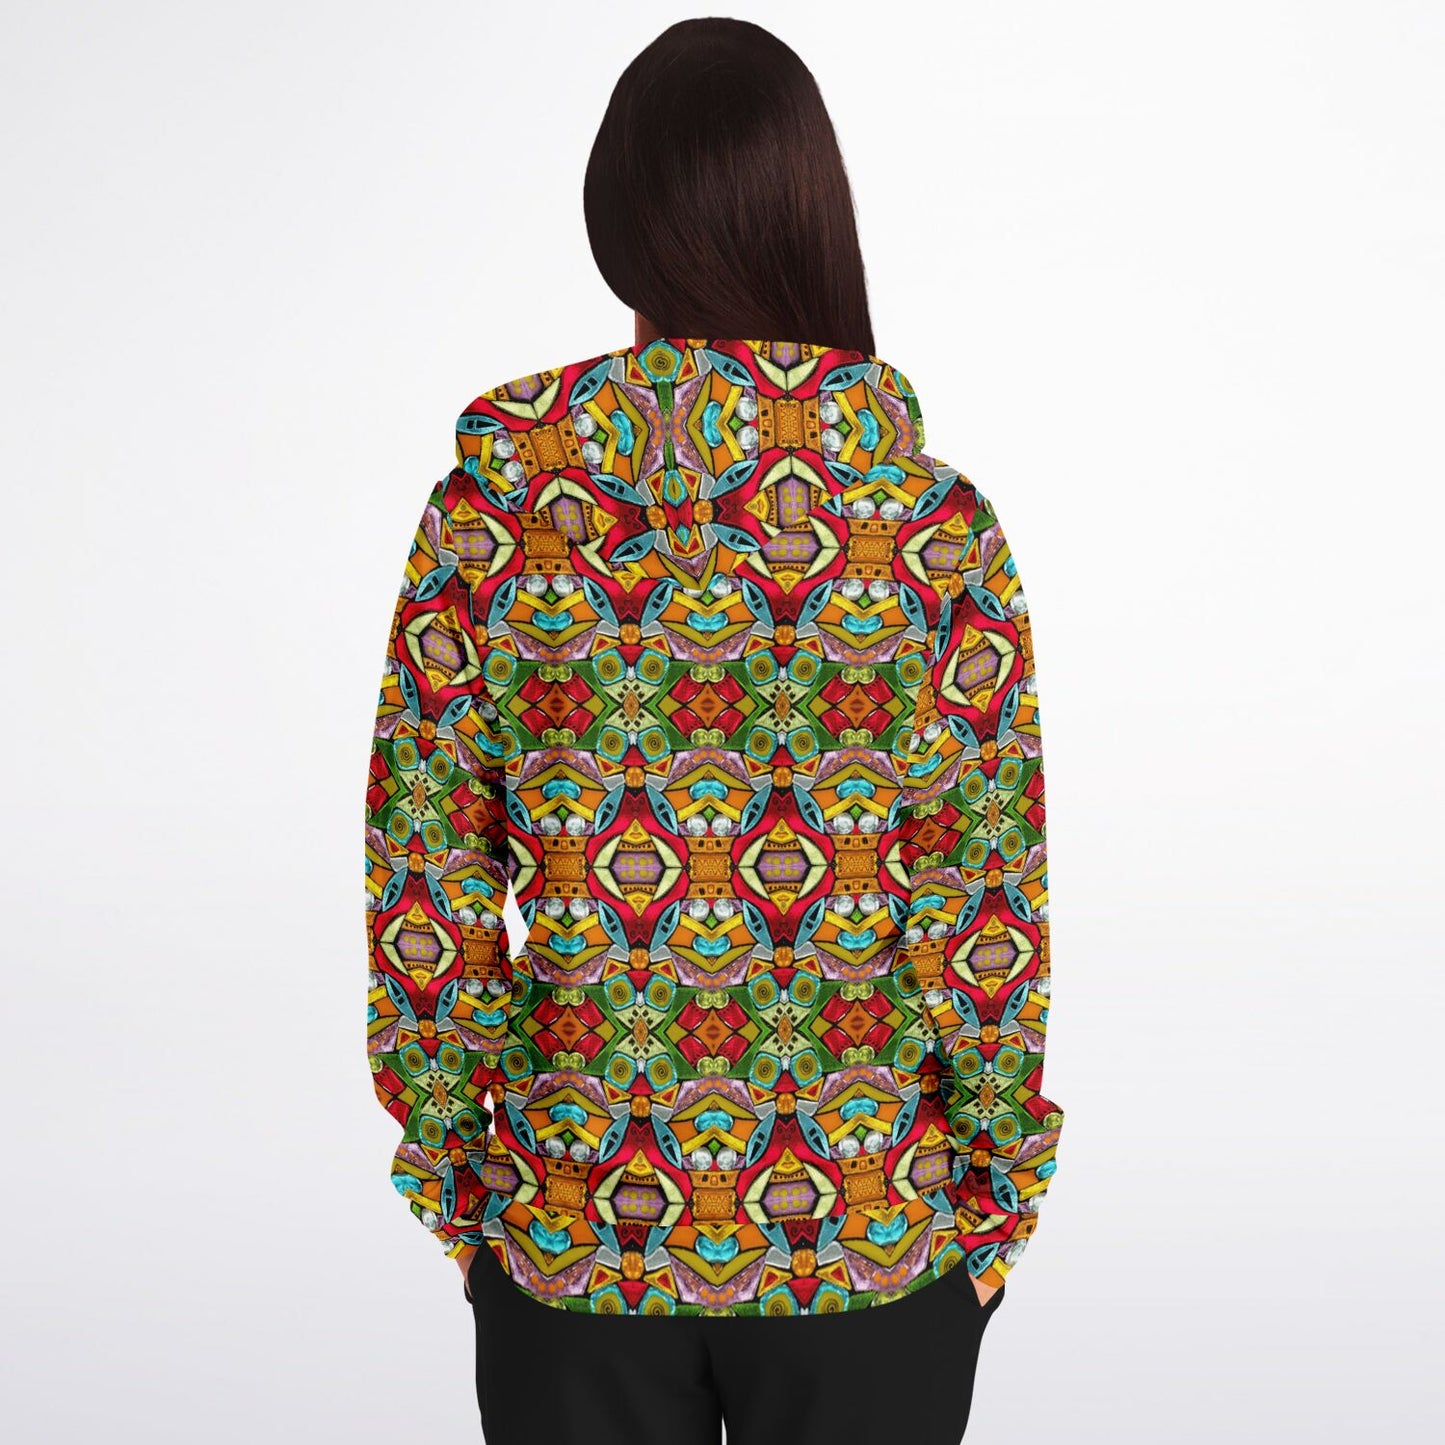 back of hoodie with colorful print